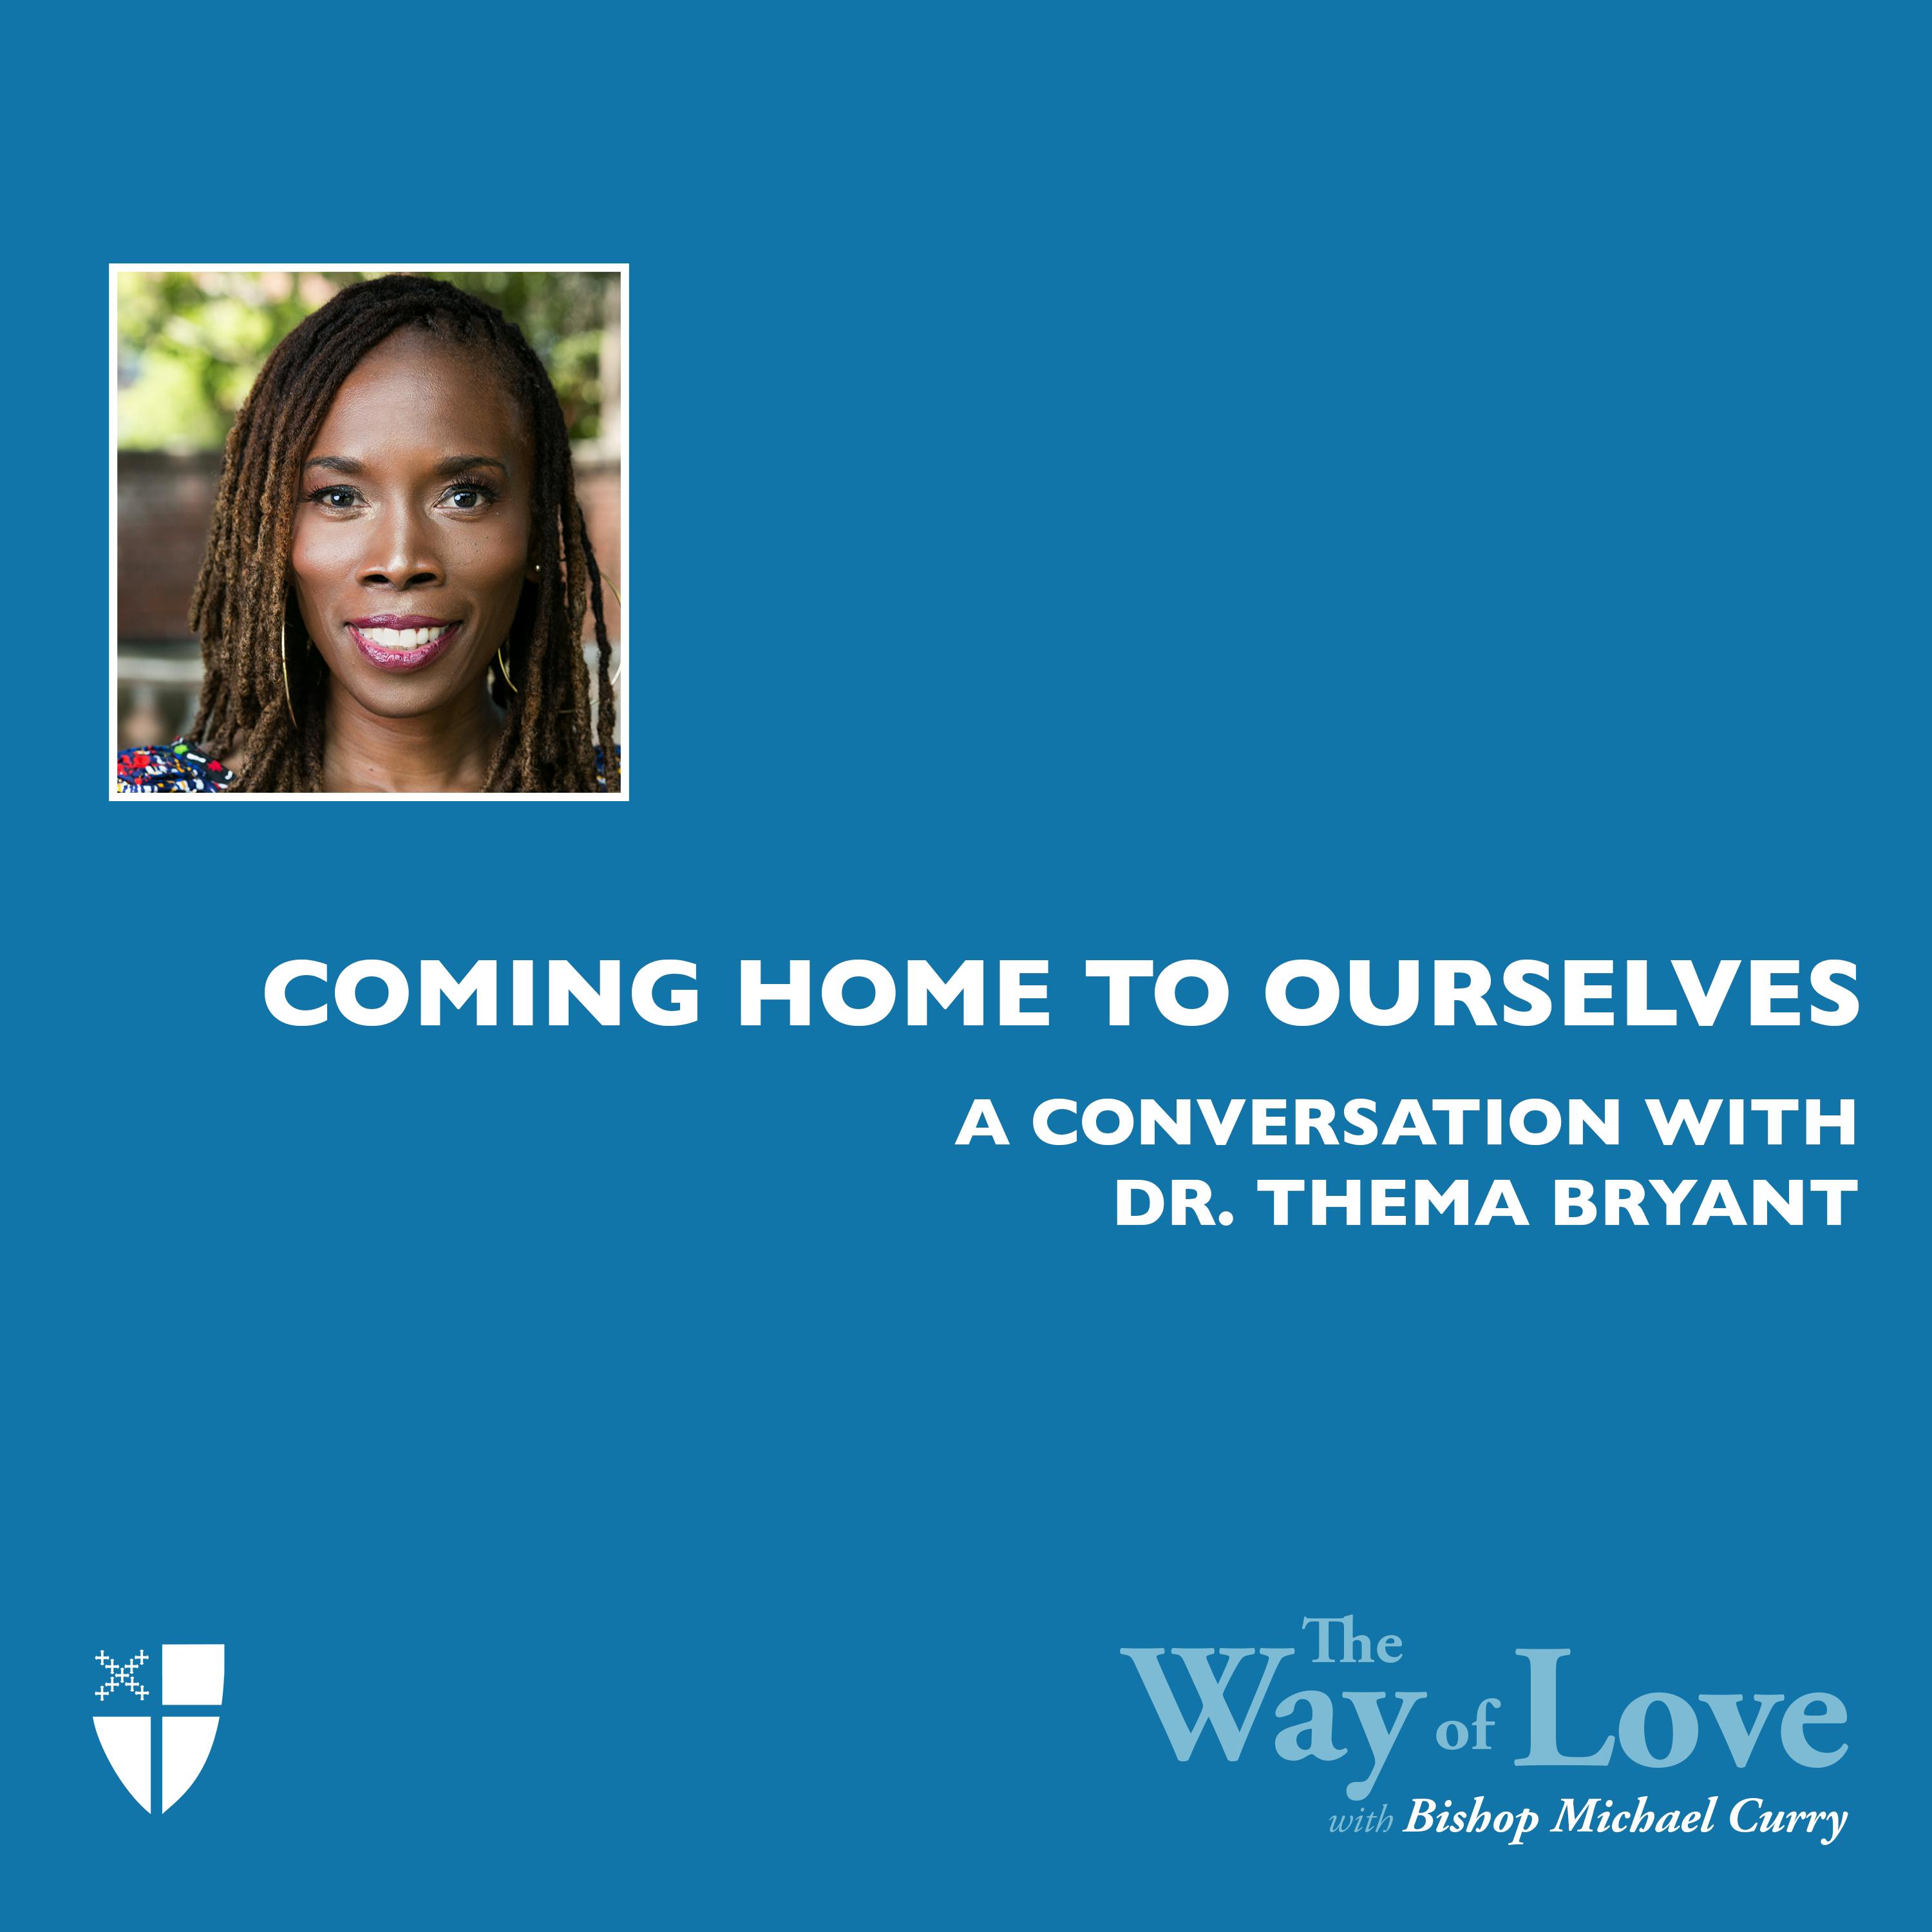 Coming Home to Ourselves with Dr. Thema Bryant